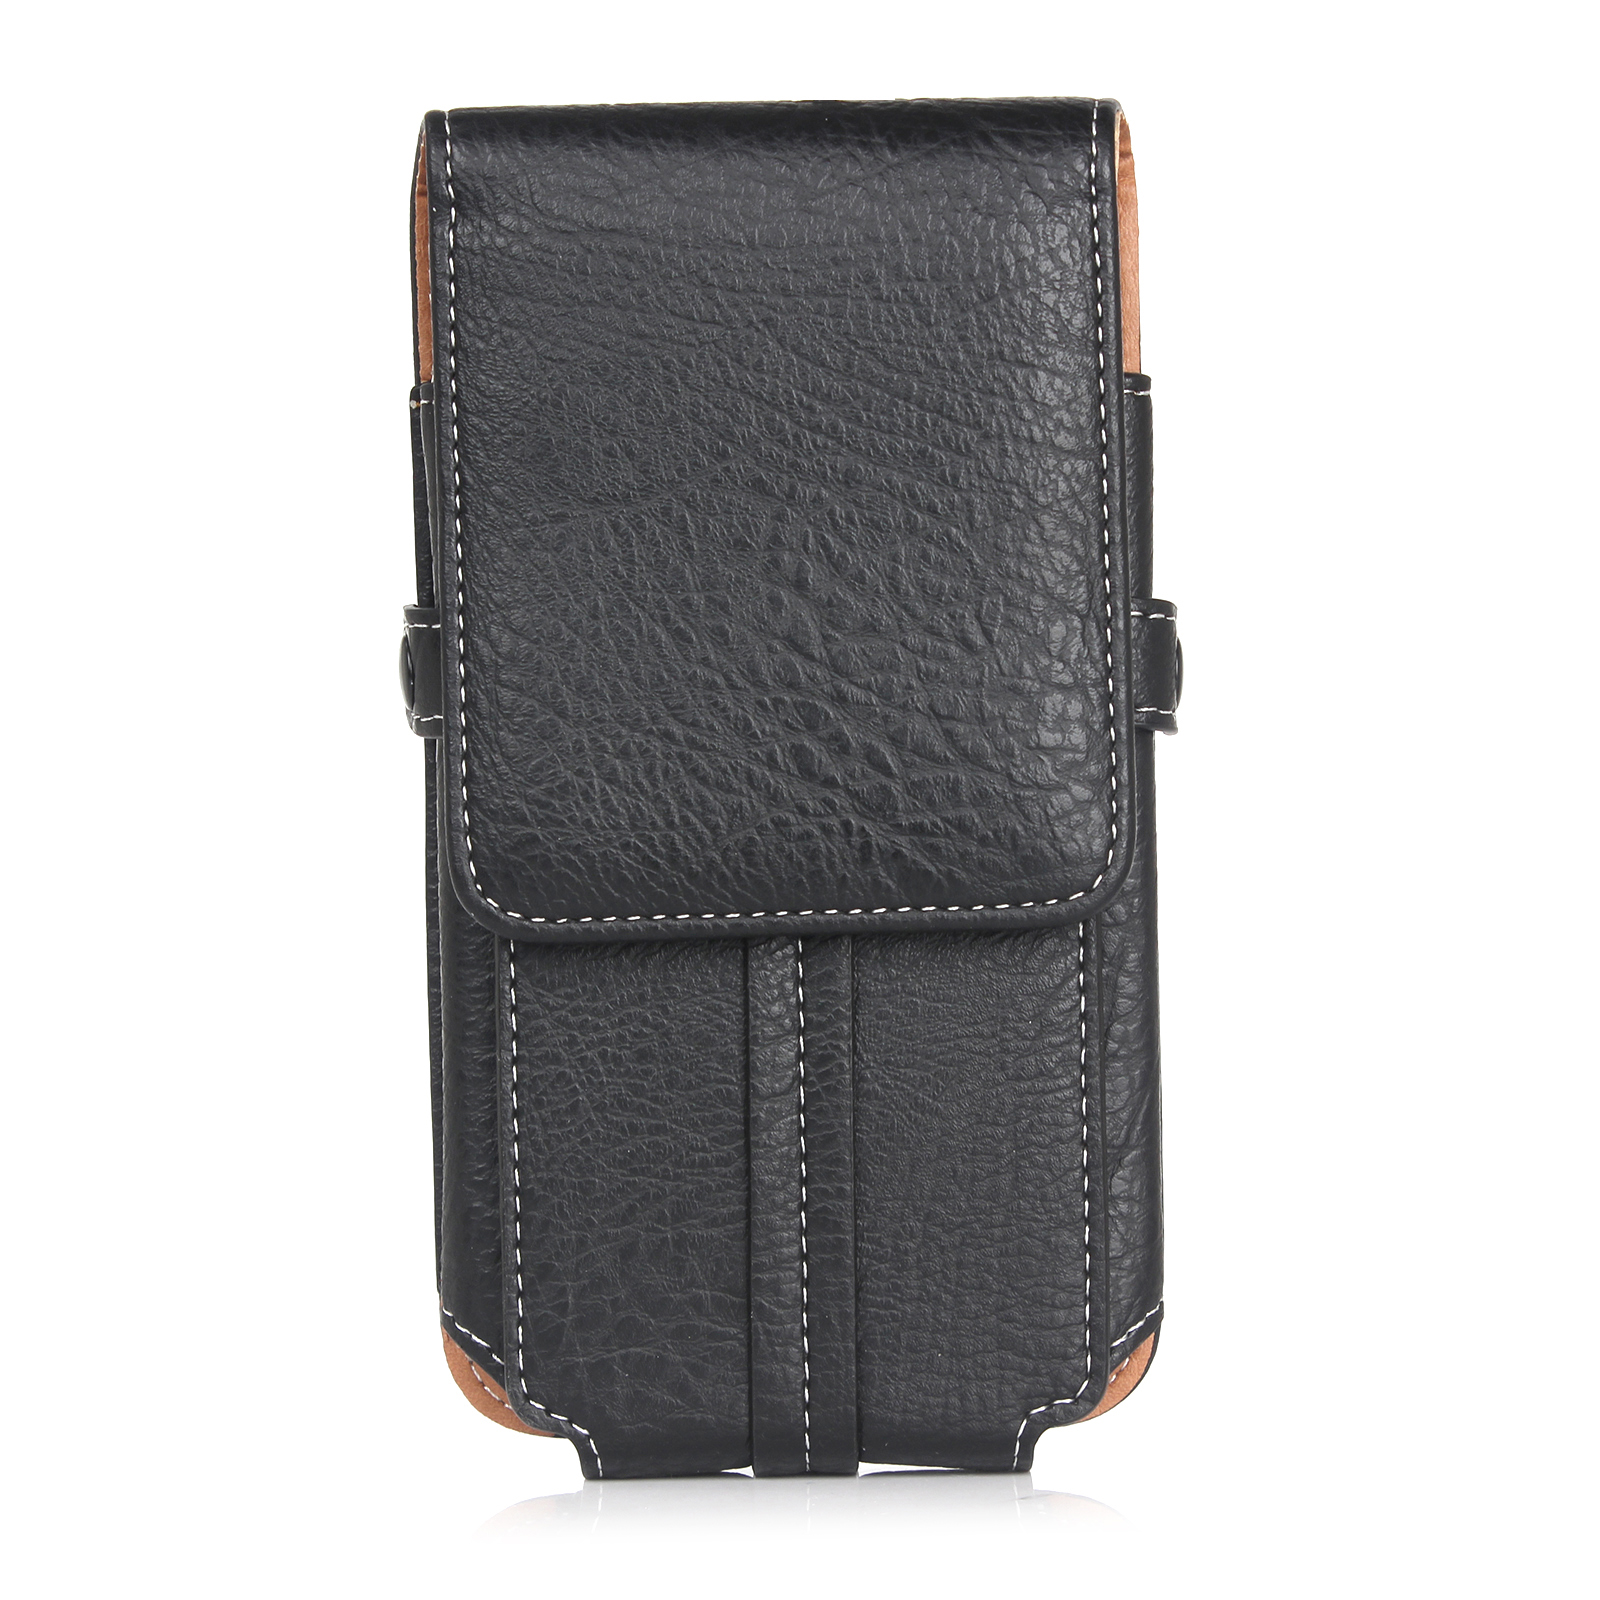 Bakeey-Casual-Vintage-Bussiness-64-inch-Vertical-Multi-Pocket-Multi-Card-Slot-PU-Leather-Mobile-Phon-1692765-3